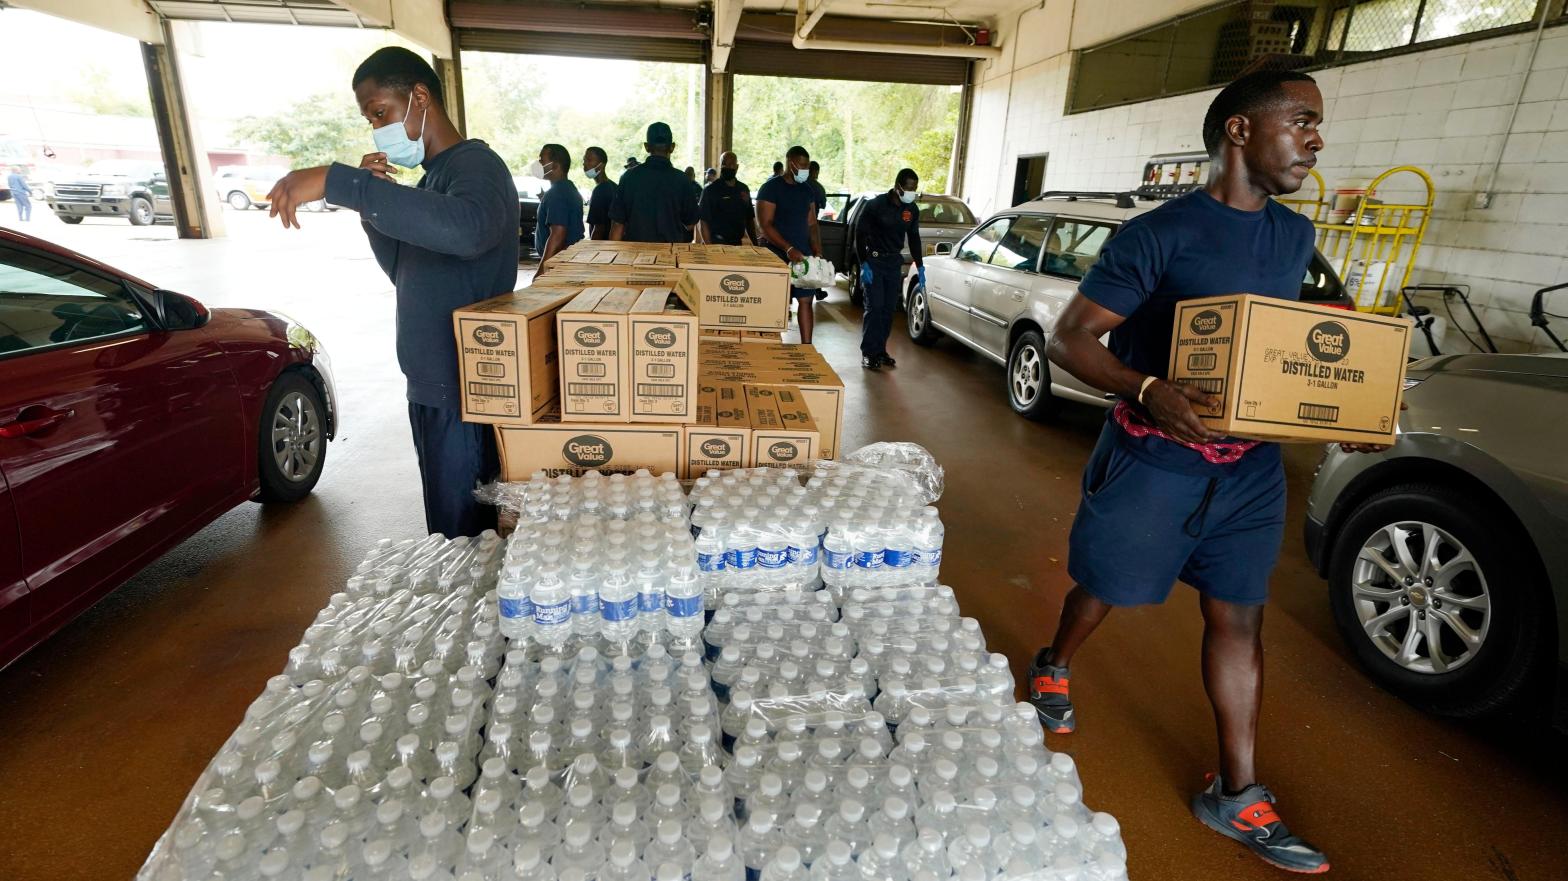 Firefighters and recruits for the Jackson, Miss., Fire Department carry cases of bottled water to residents vehicles, Aug. 18, 2022, as part of the city's response to longstanding water system problems.  (Photo: Rogelio V. Solis, AP)